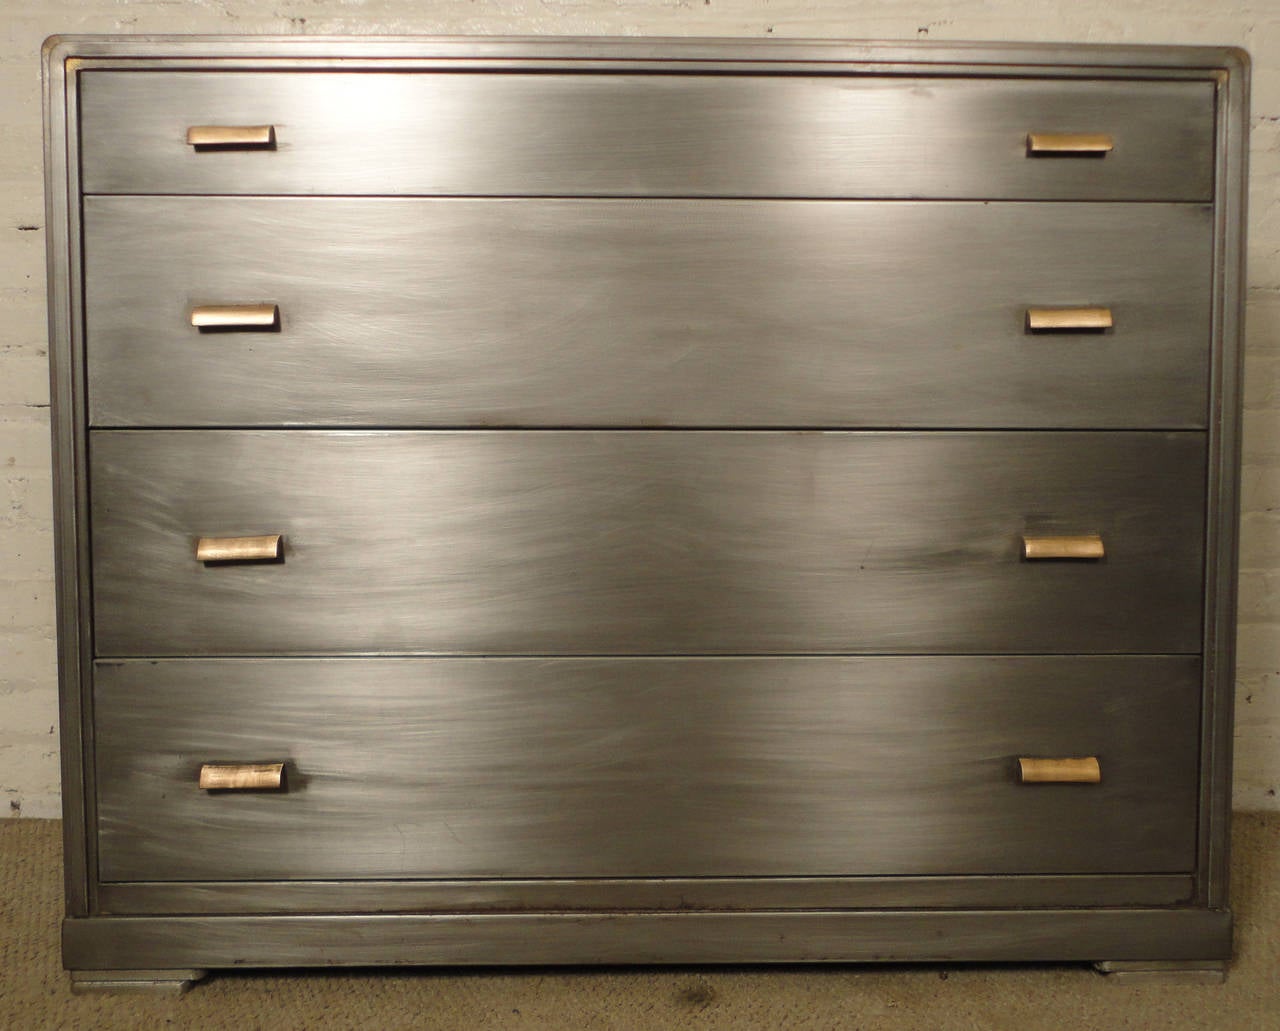 Vintage modern Industrial-style 1960s Simmons dresser, features four drawers with sculpted brass handles.

(Please confirm item location-NY or NJ-with dealer).